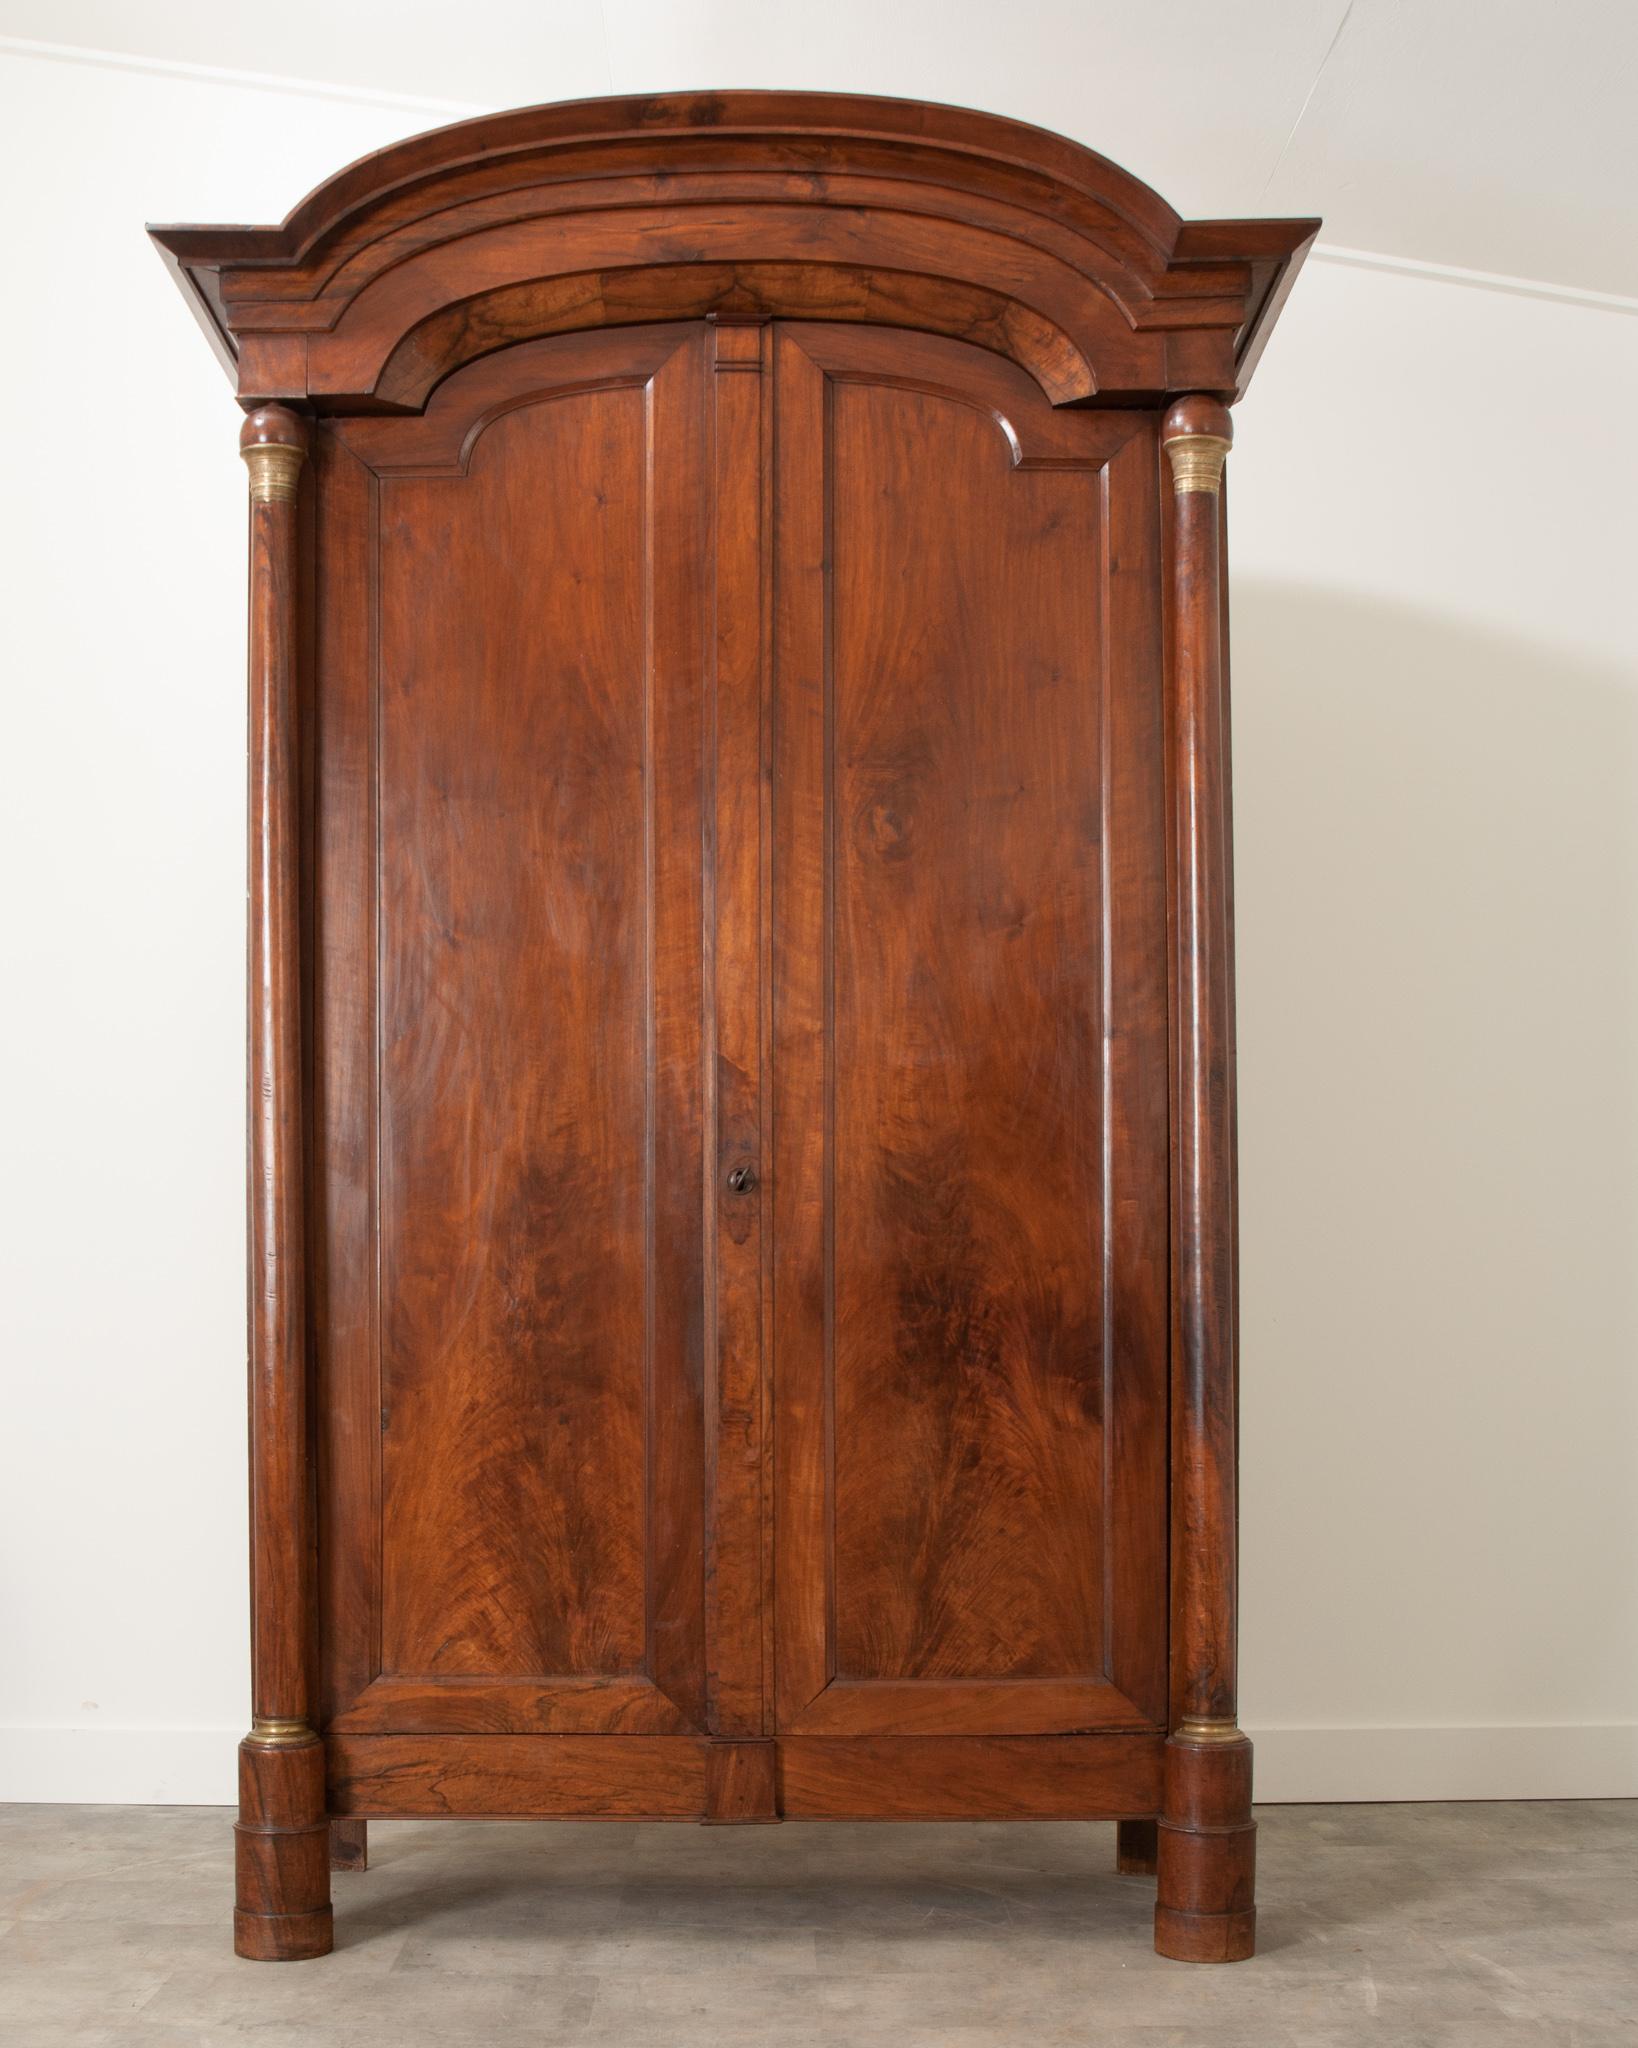 This massive Empire style armoire was crafted in 19th century France from stunning walnut. At over 8.5 feet tall, this massive armoire is crowned with a Chapeau de la Champ style bonnet – named after the hats worn by French military field officers